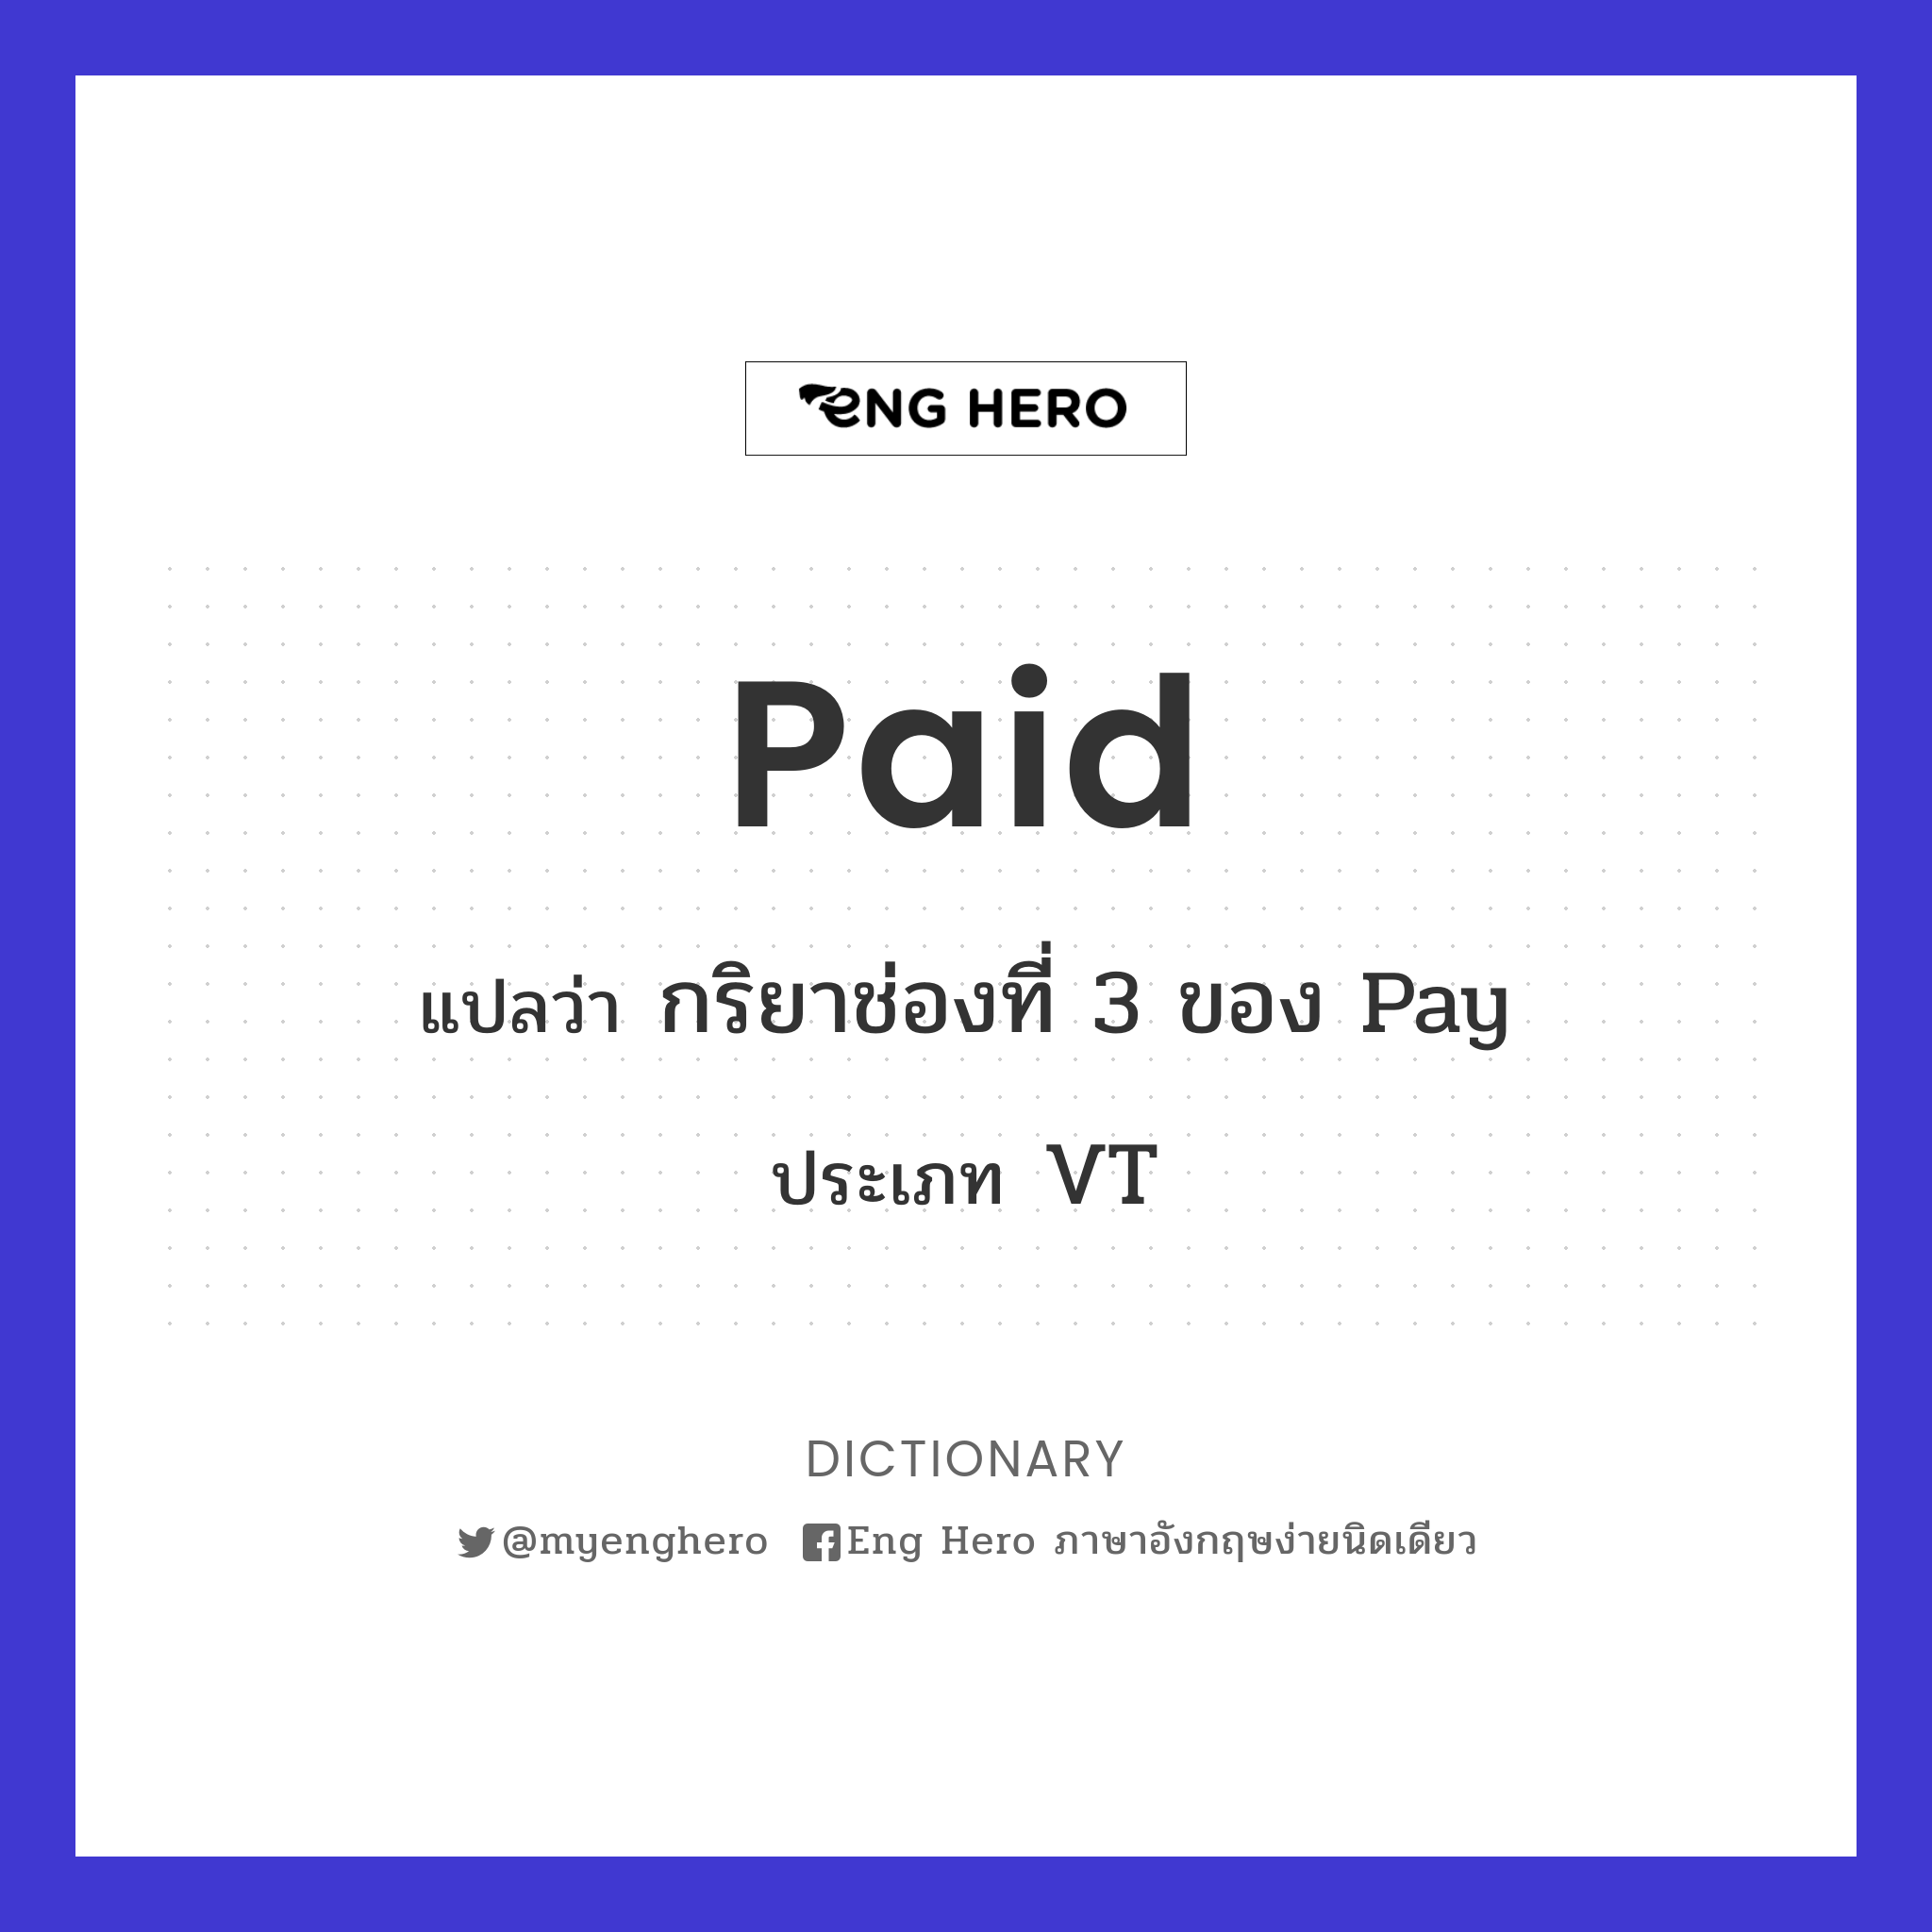 paid